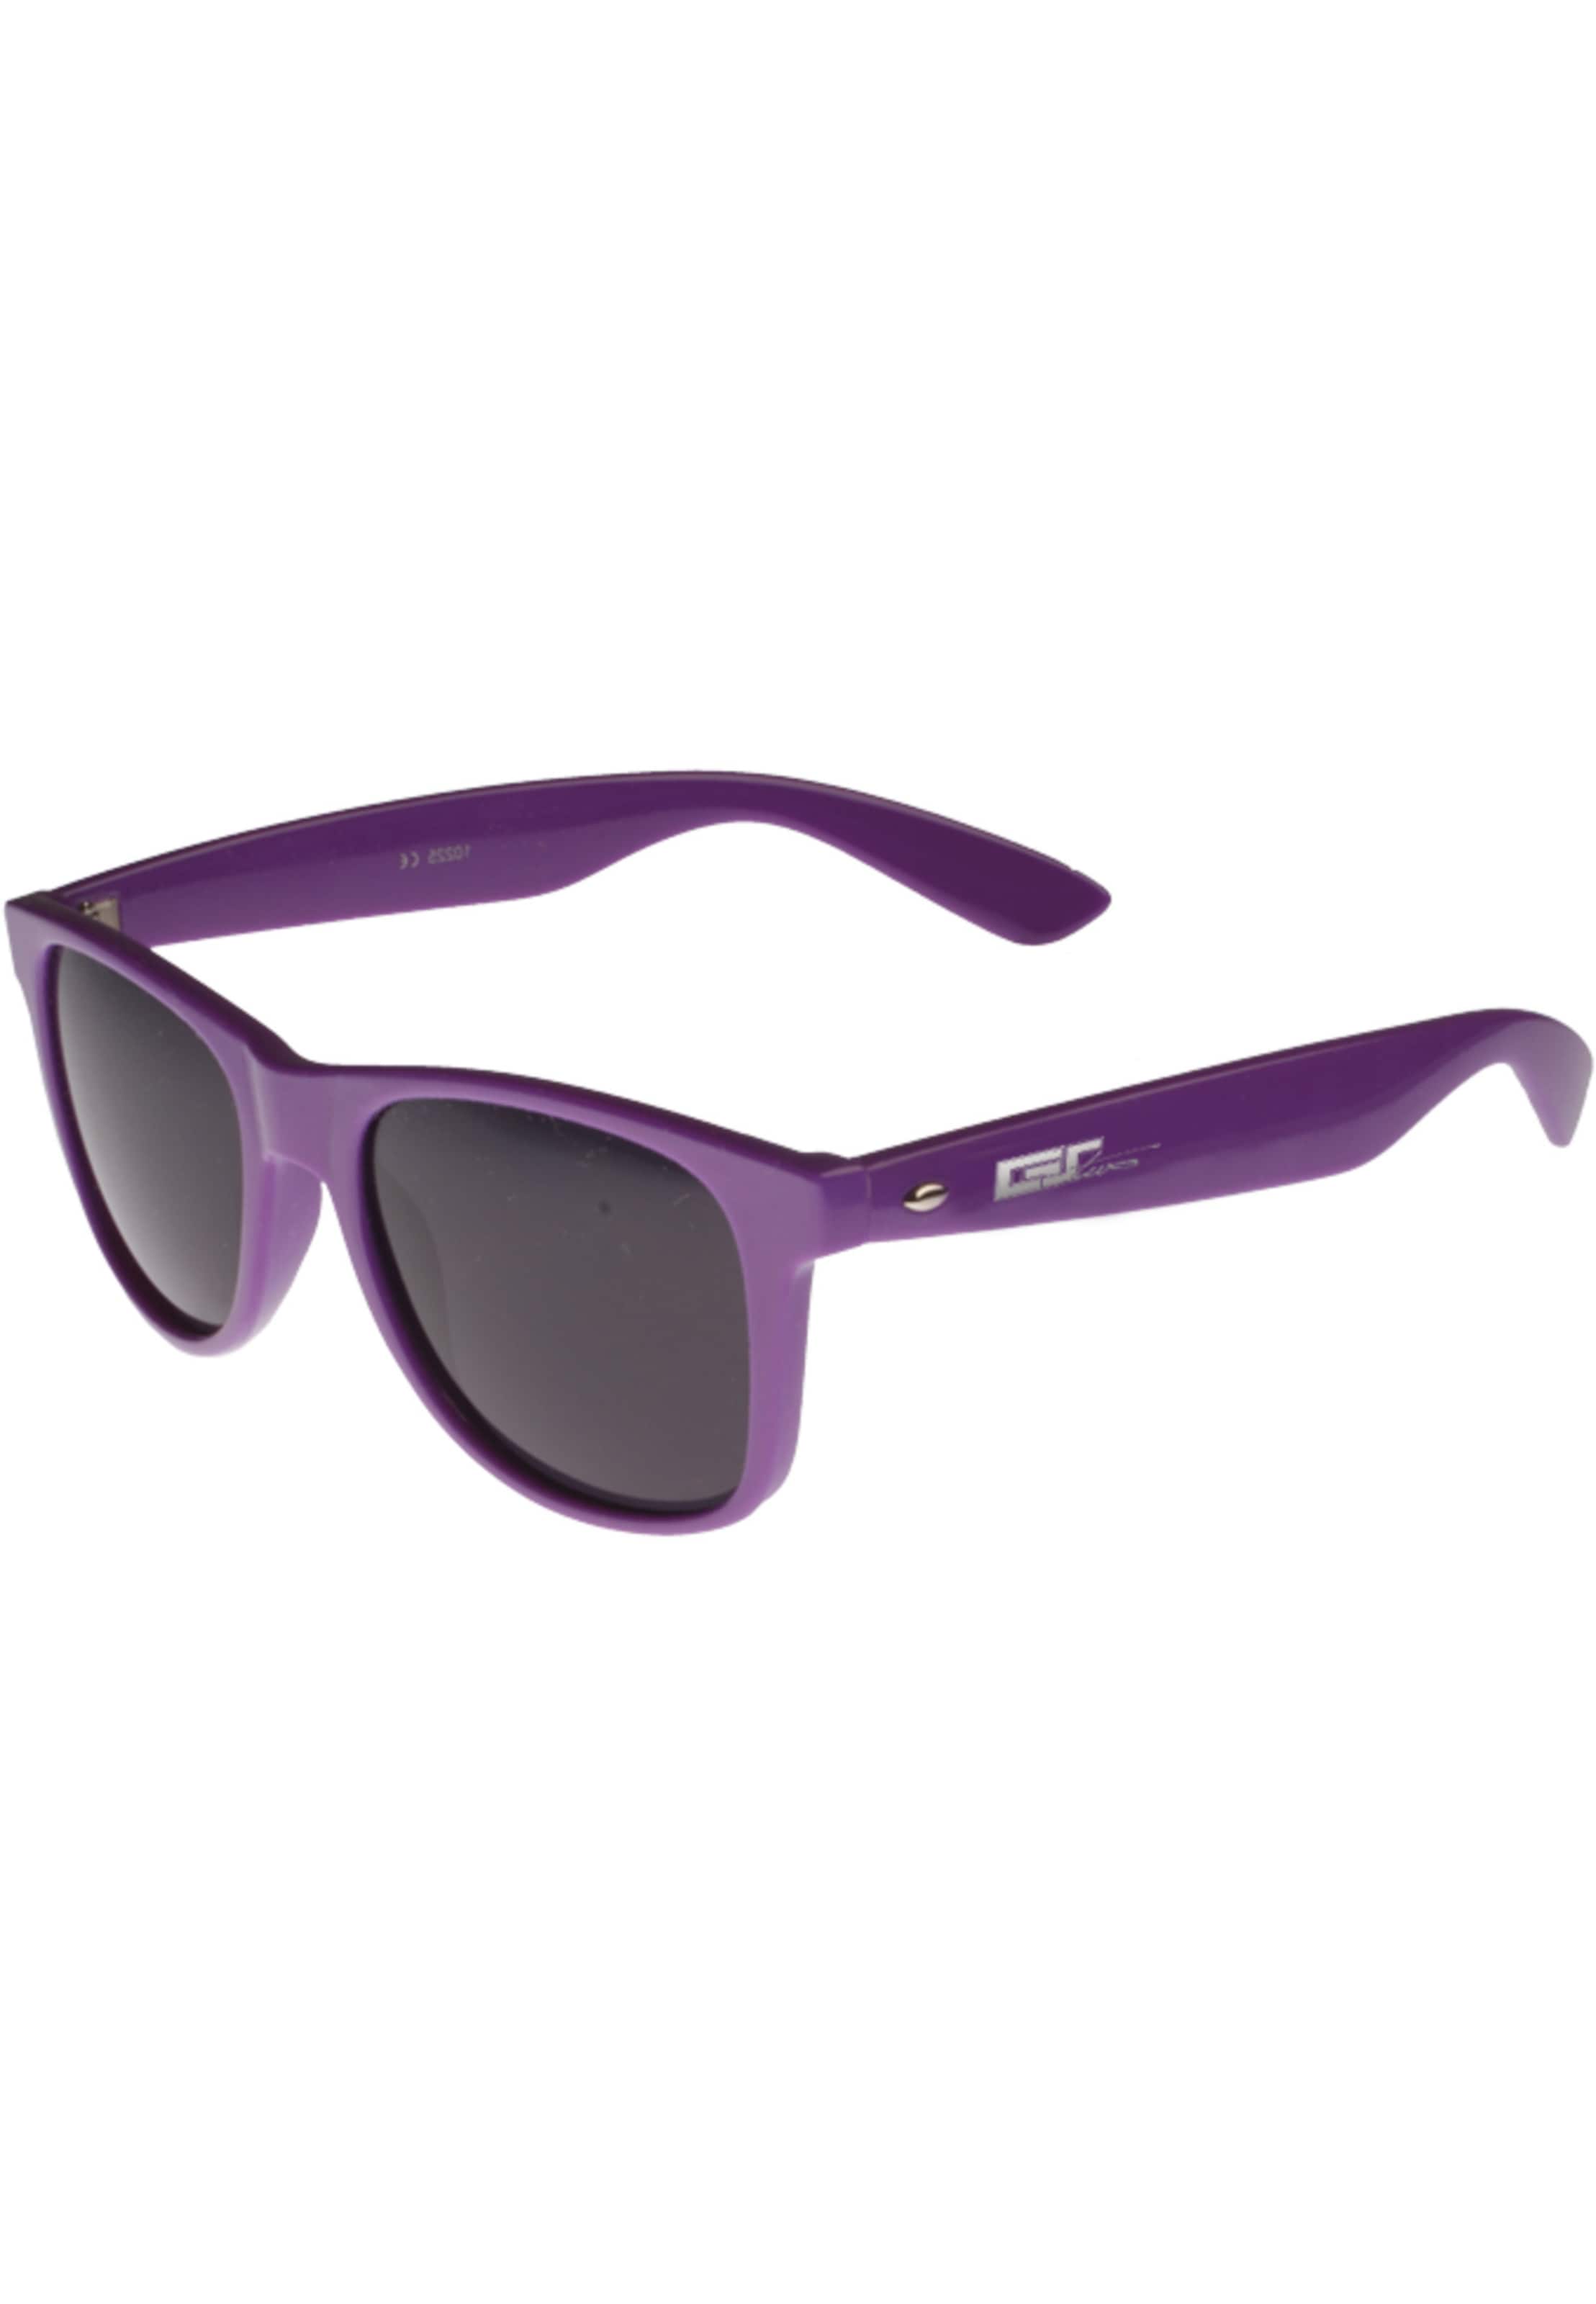 MSTRDS Sonnenbrille GStwo in Lila 